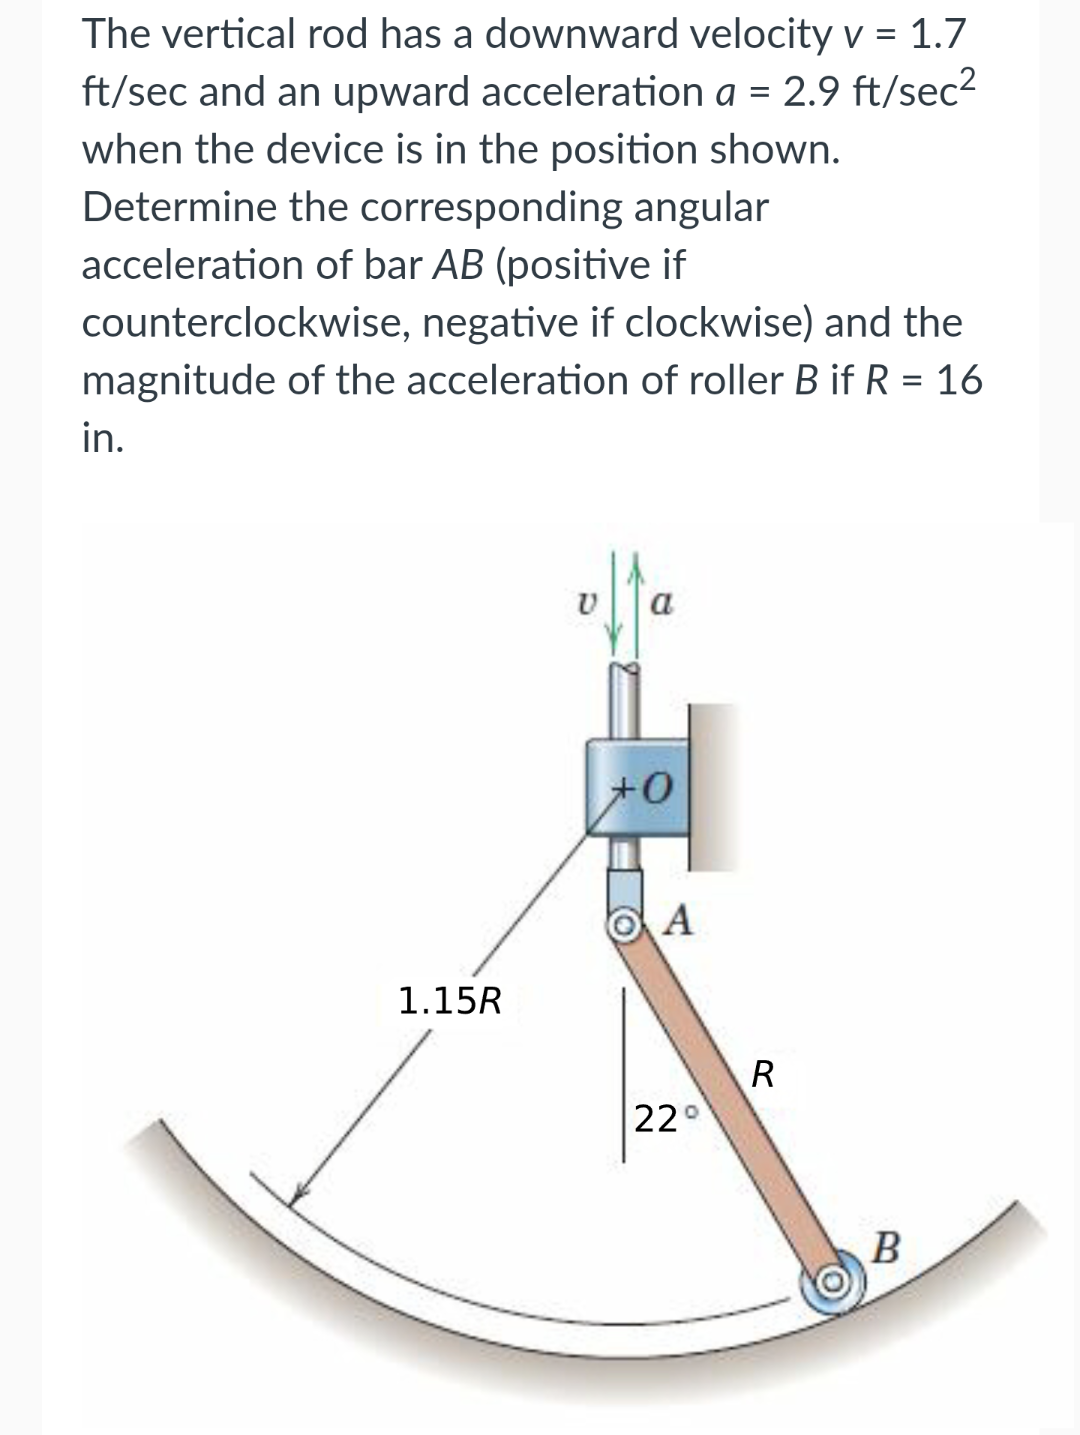 The vertical rod has a downward velocity v = 1.7
ft/sec and an upward acceleration a = 2.9 ft/sec²
when the device is in the position shown.
Determine the corresponding angular
acceleration of bar AB (positive if
counterclockwise, negative if clockwise) and the
magnitude of the acceleration of roller B if R = 16
in.
1.15R
a
+0
A
22°
R
B